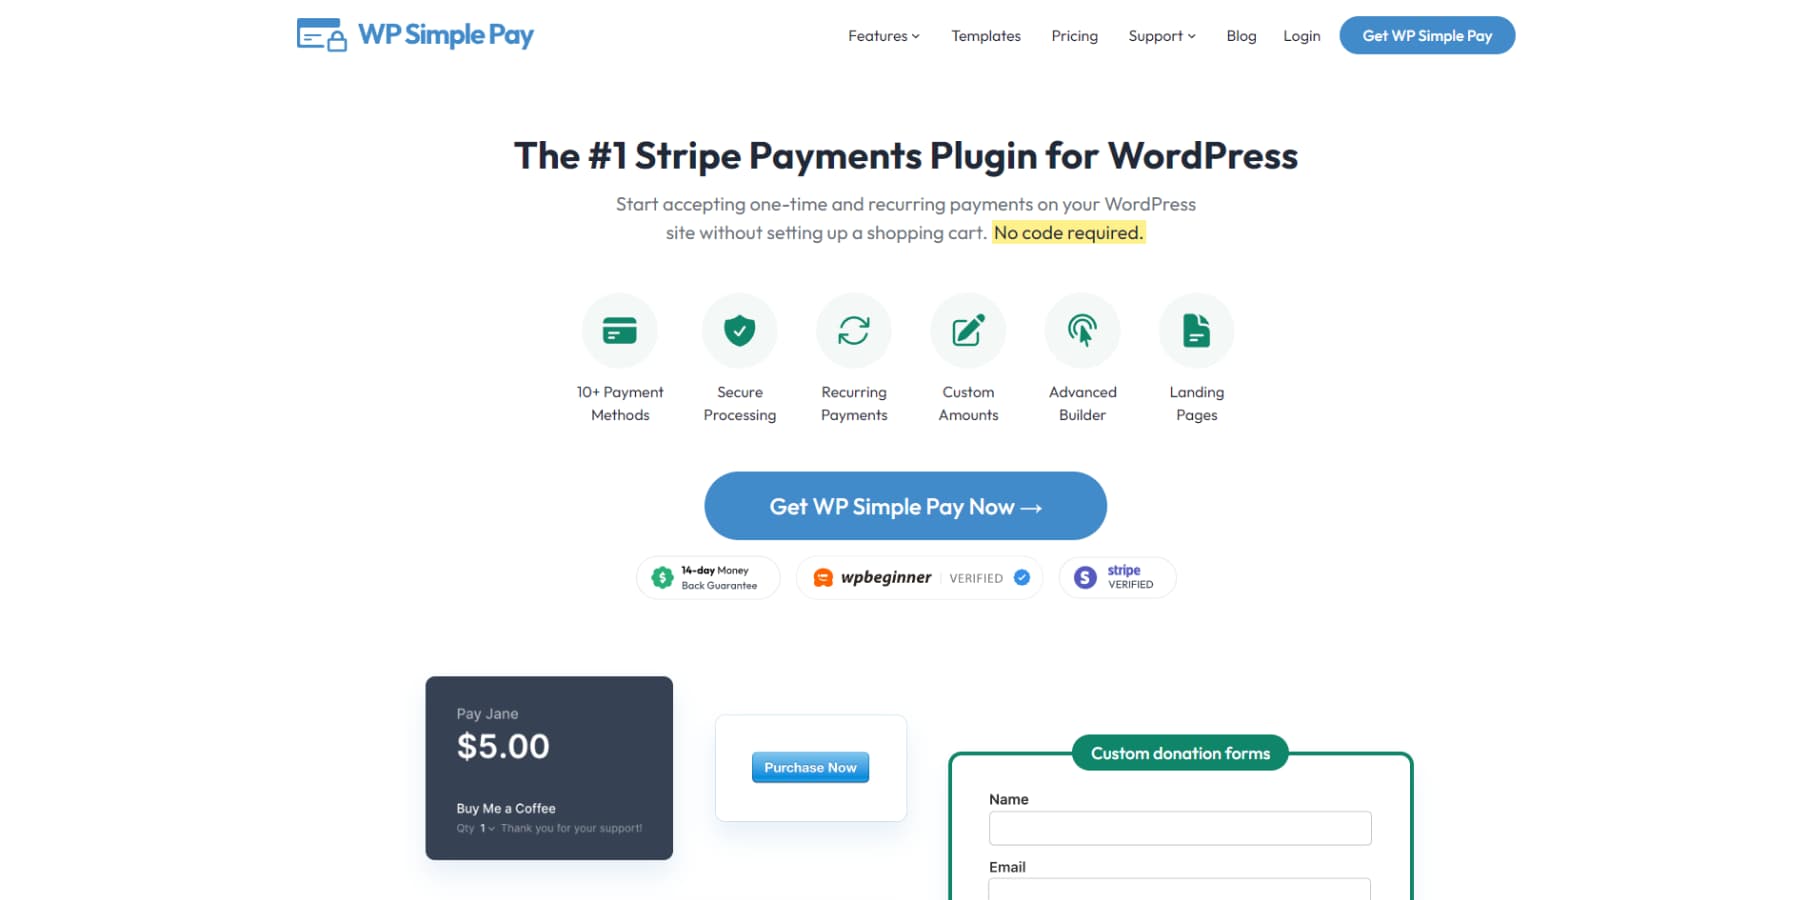 A screenshot of WP Simple Pay's homepage